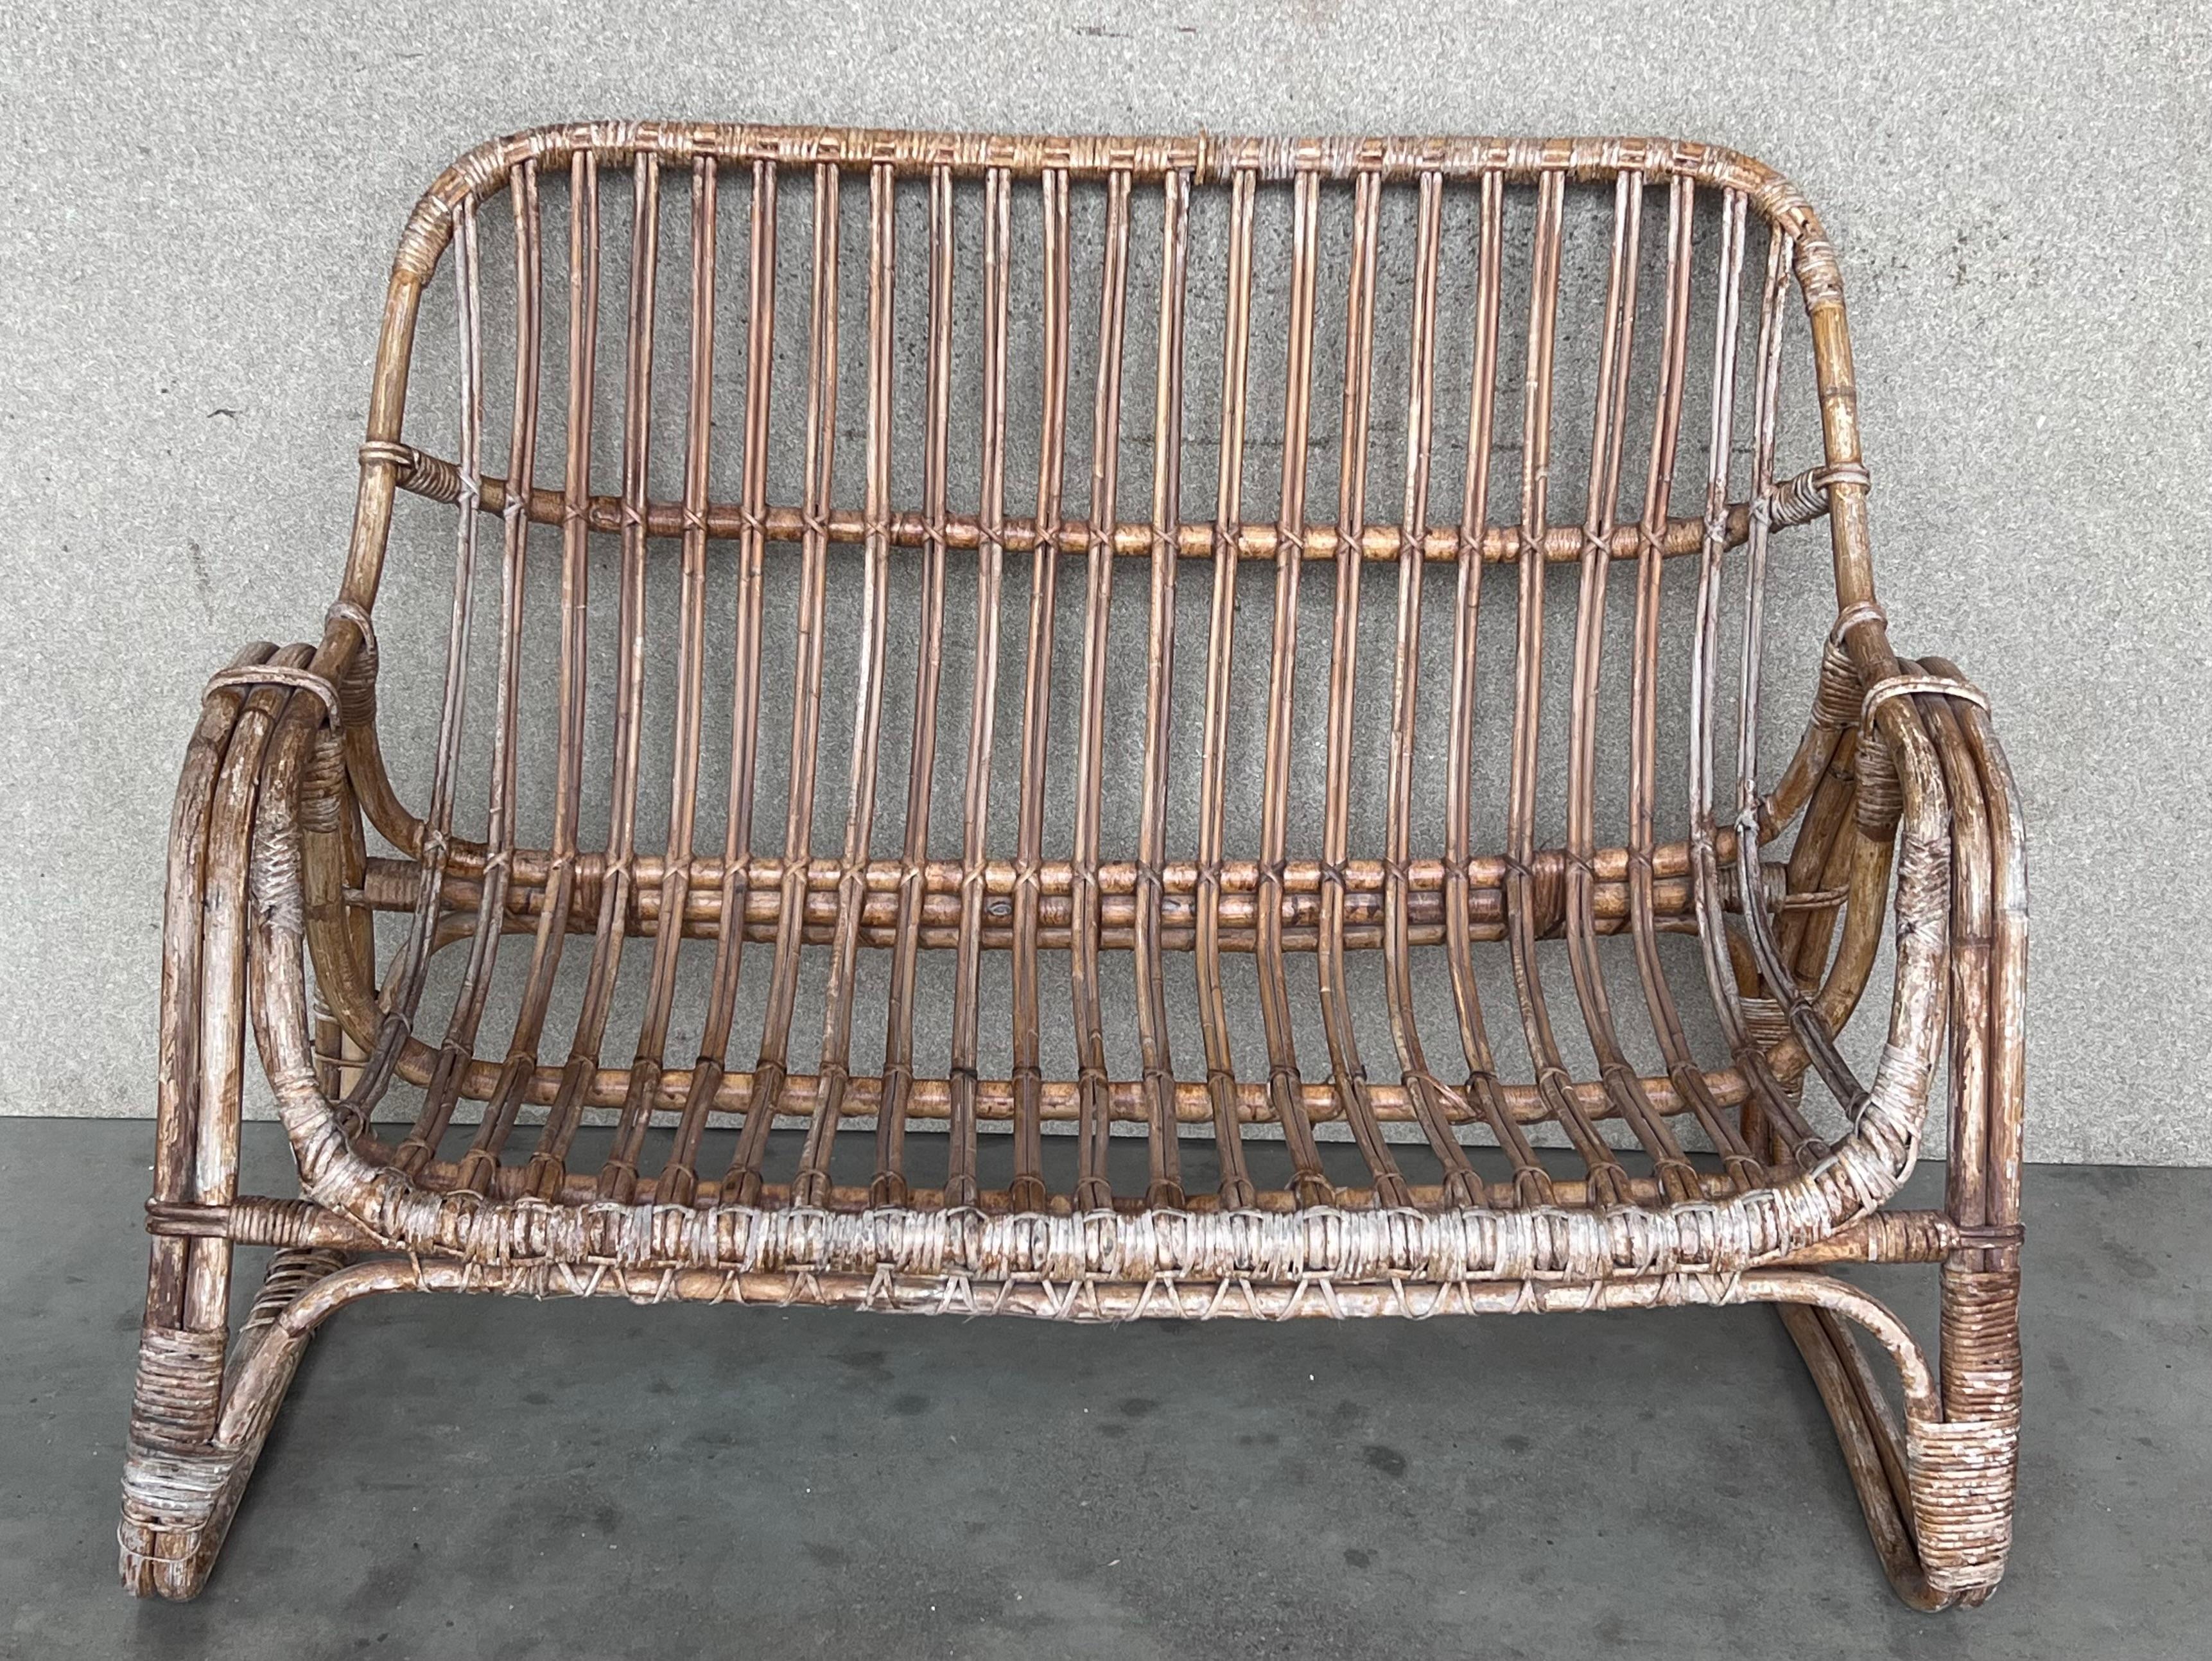 Nicely shaped rattan and bamboo frame. This wonderful Vintage Mid-Century Modern love seat or sofa is in very good condition with minor wear consistent with age and use, preserving a beautiful patina. This lovely piece of furniture looks wonderful